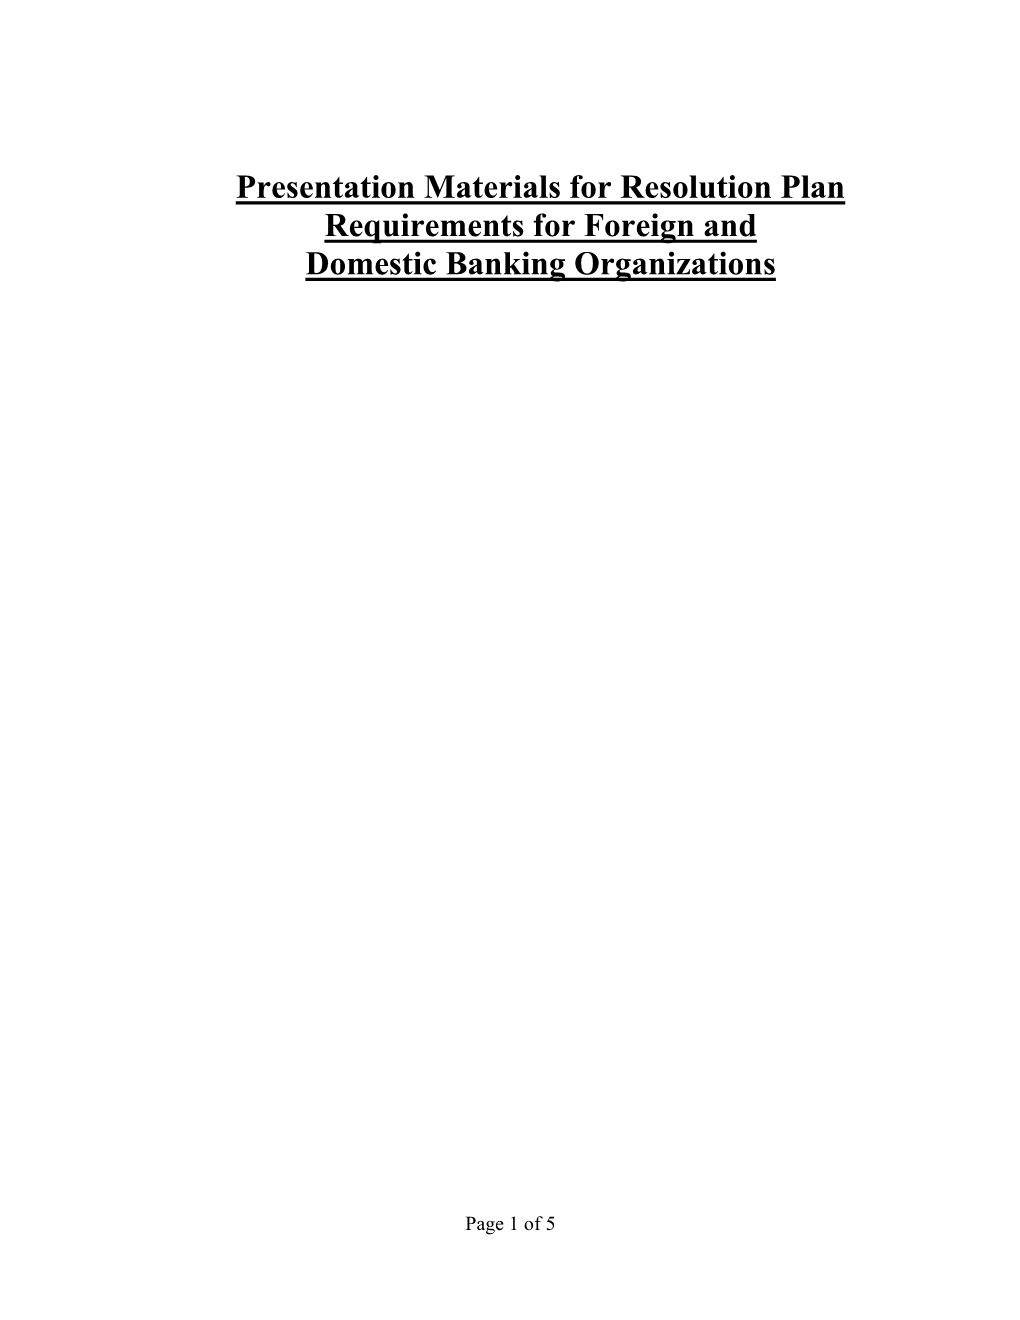 Handout Materials for Resolution Plan Requirements for Foreign